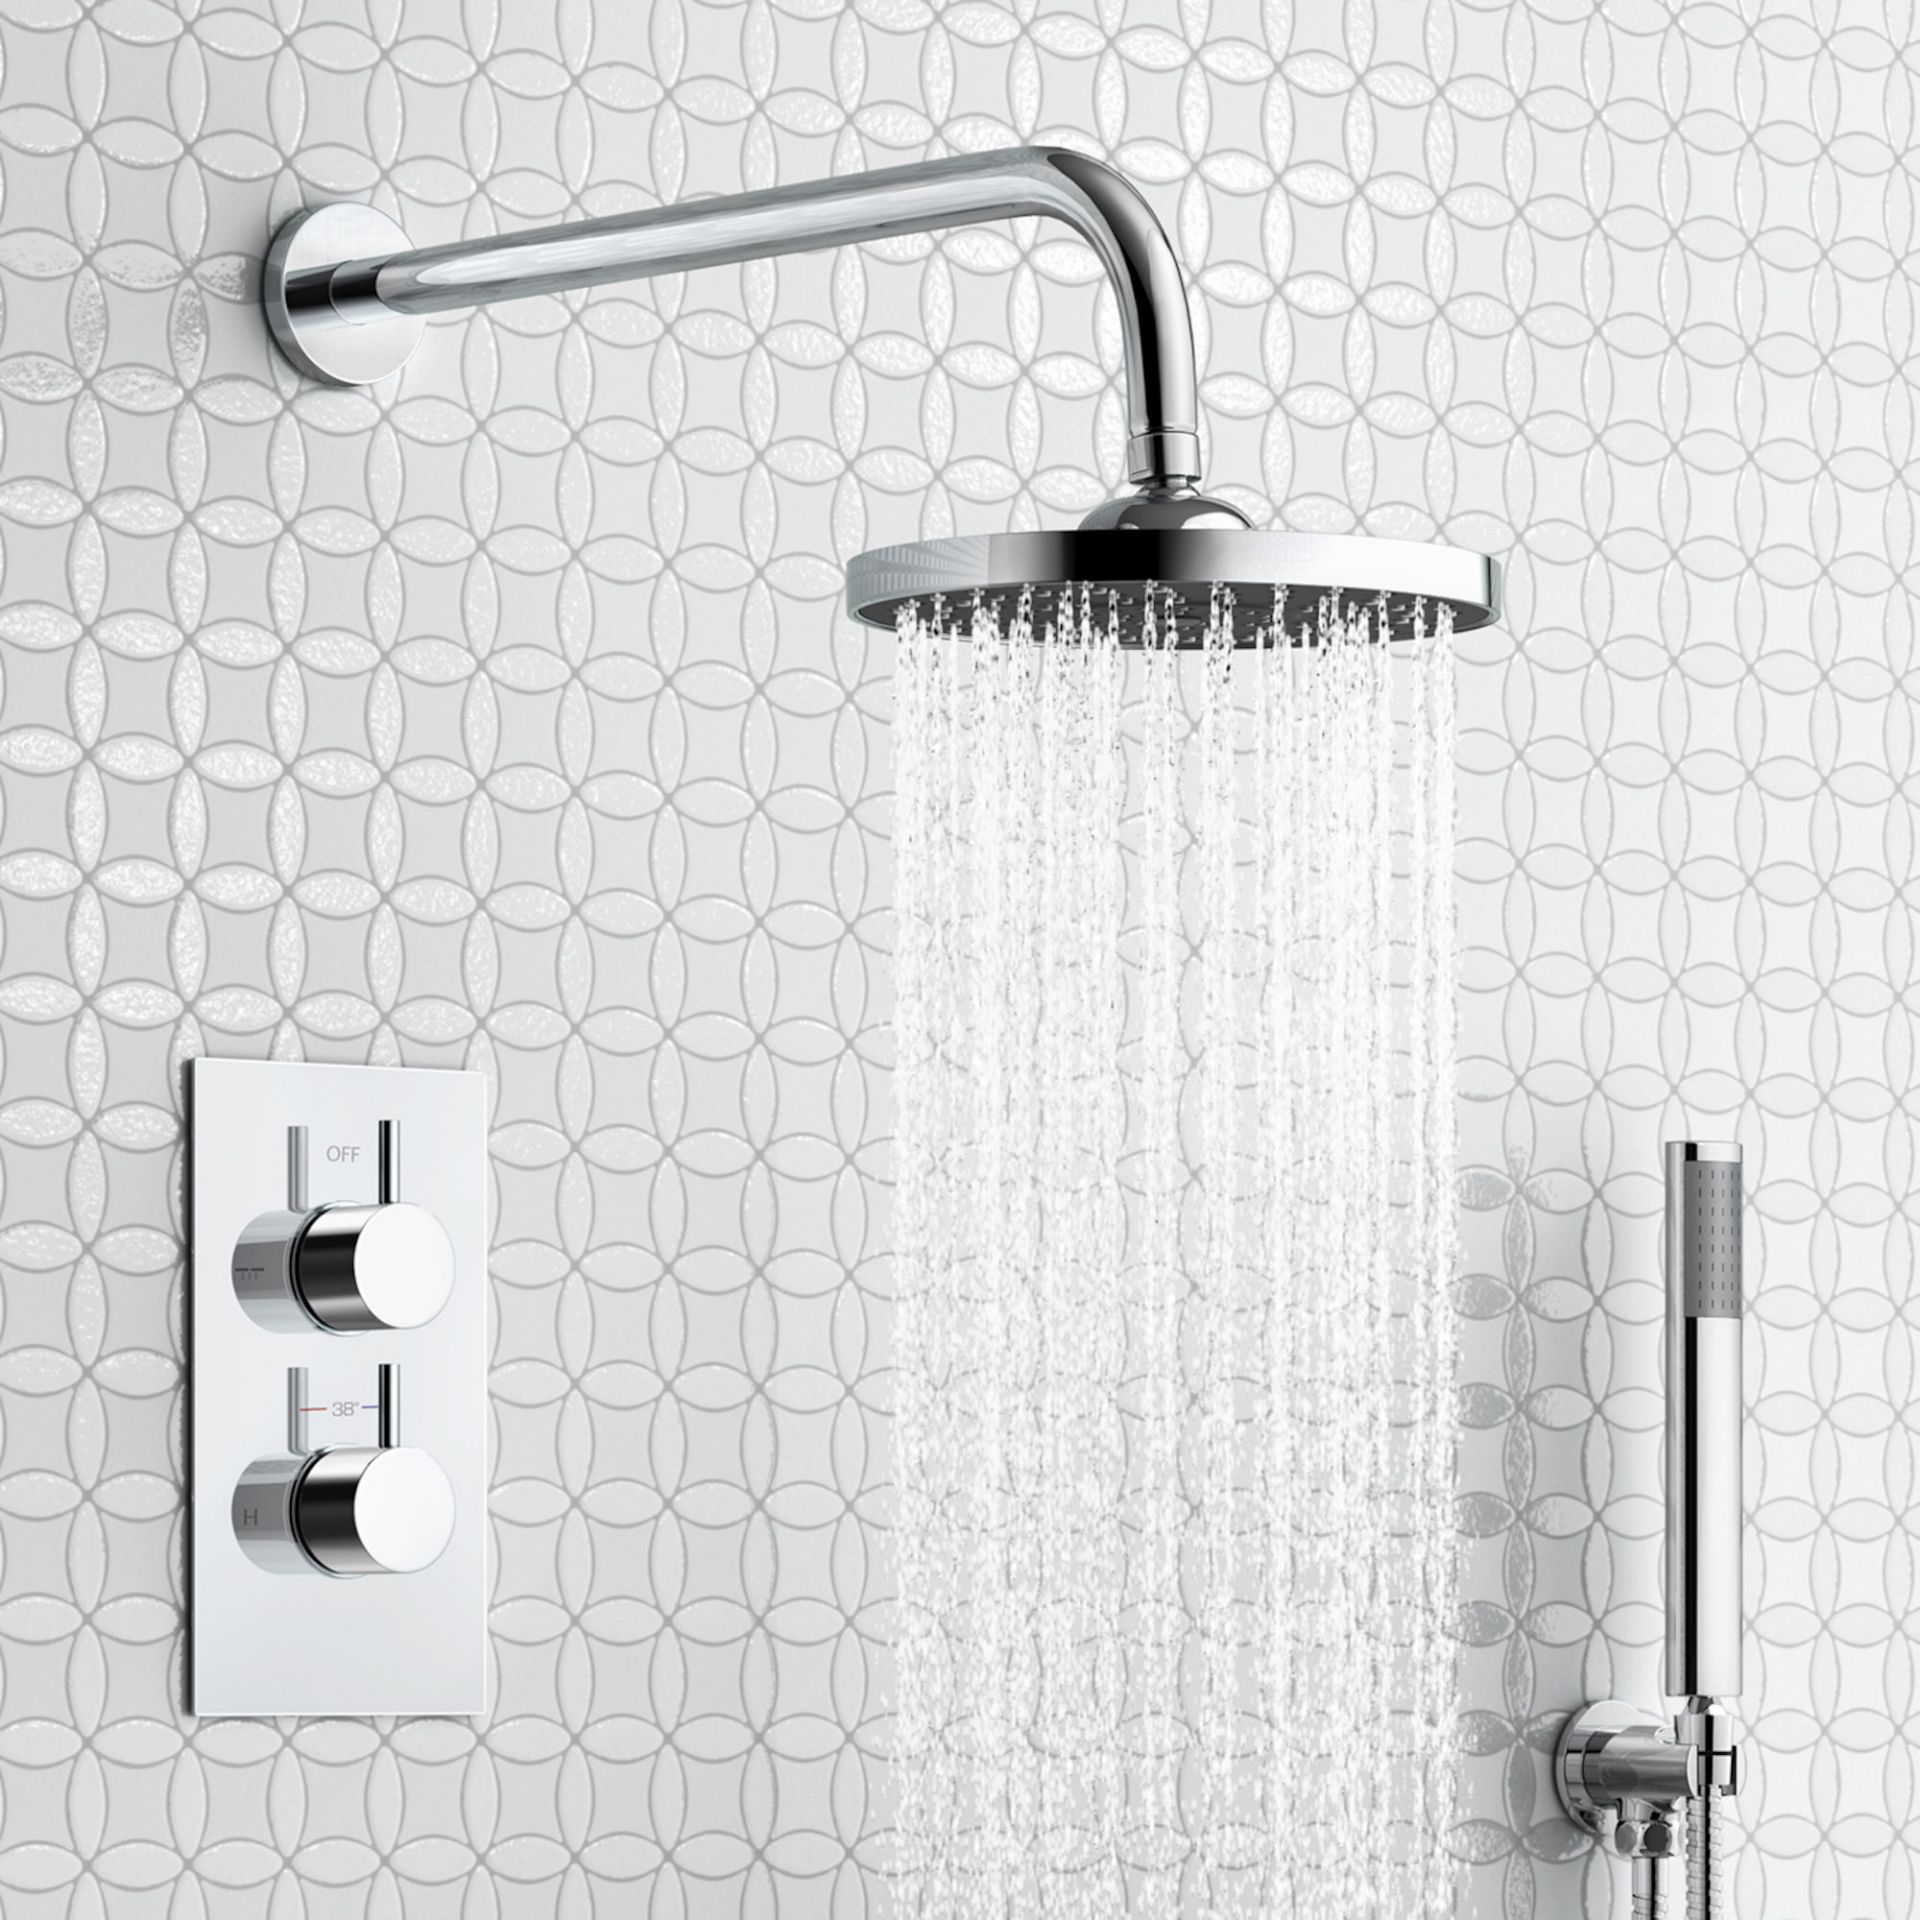 (XS47) Round Concealed Thermostatic Mixer Shower Kit & Medium Head. Family friendly detachable